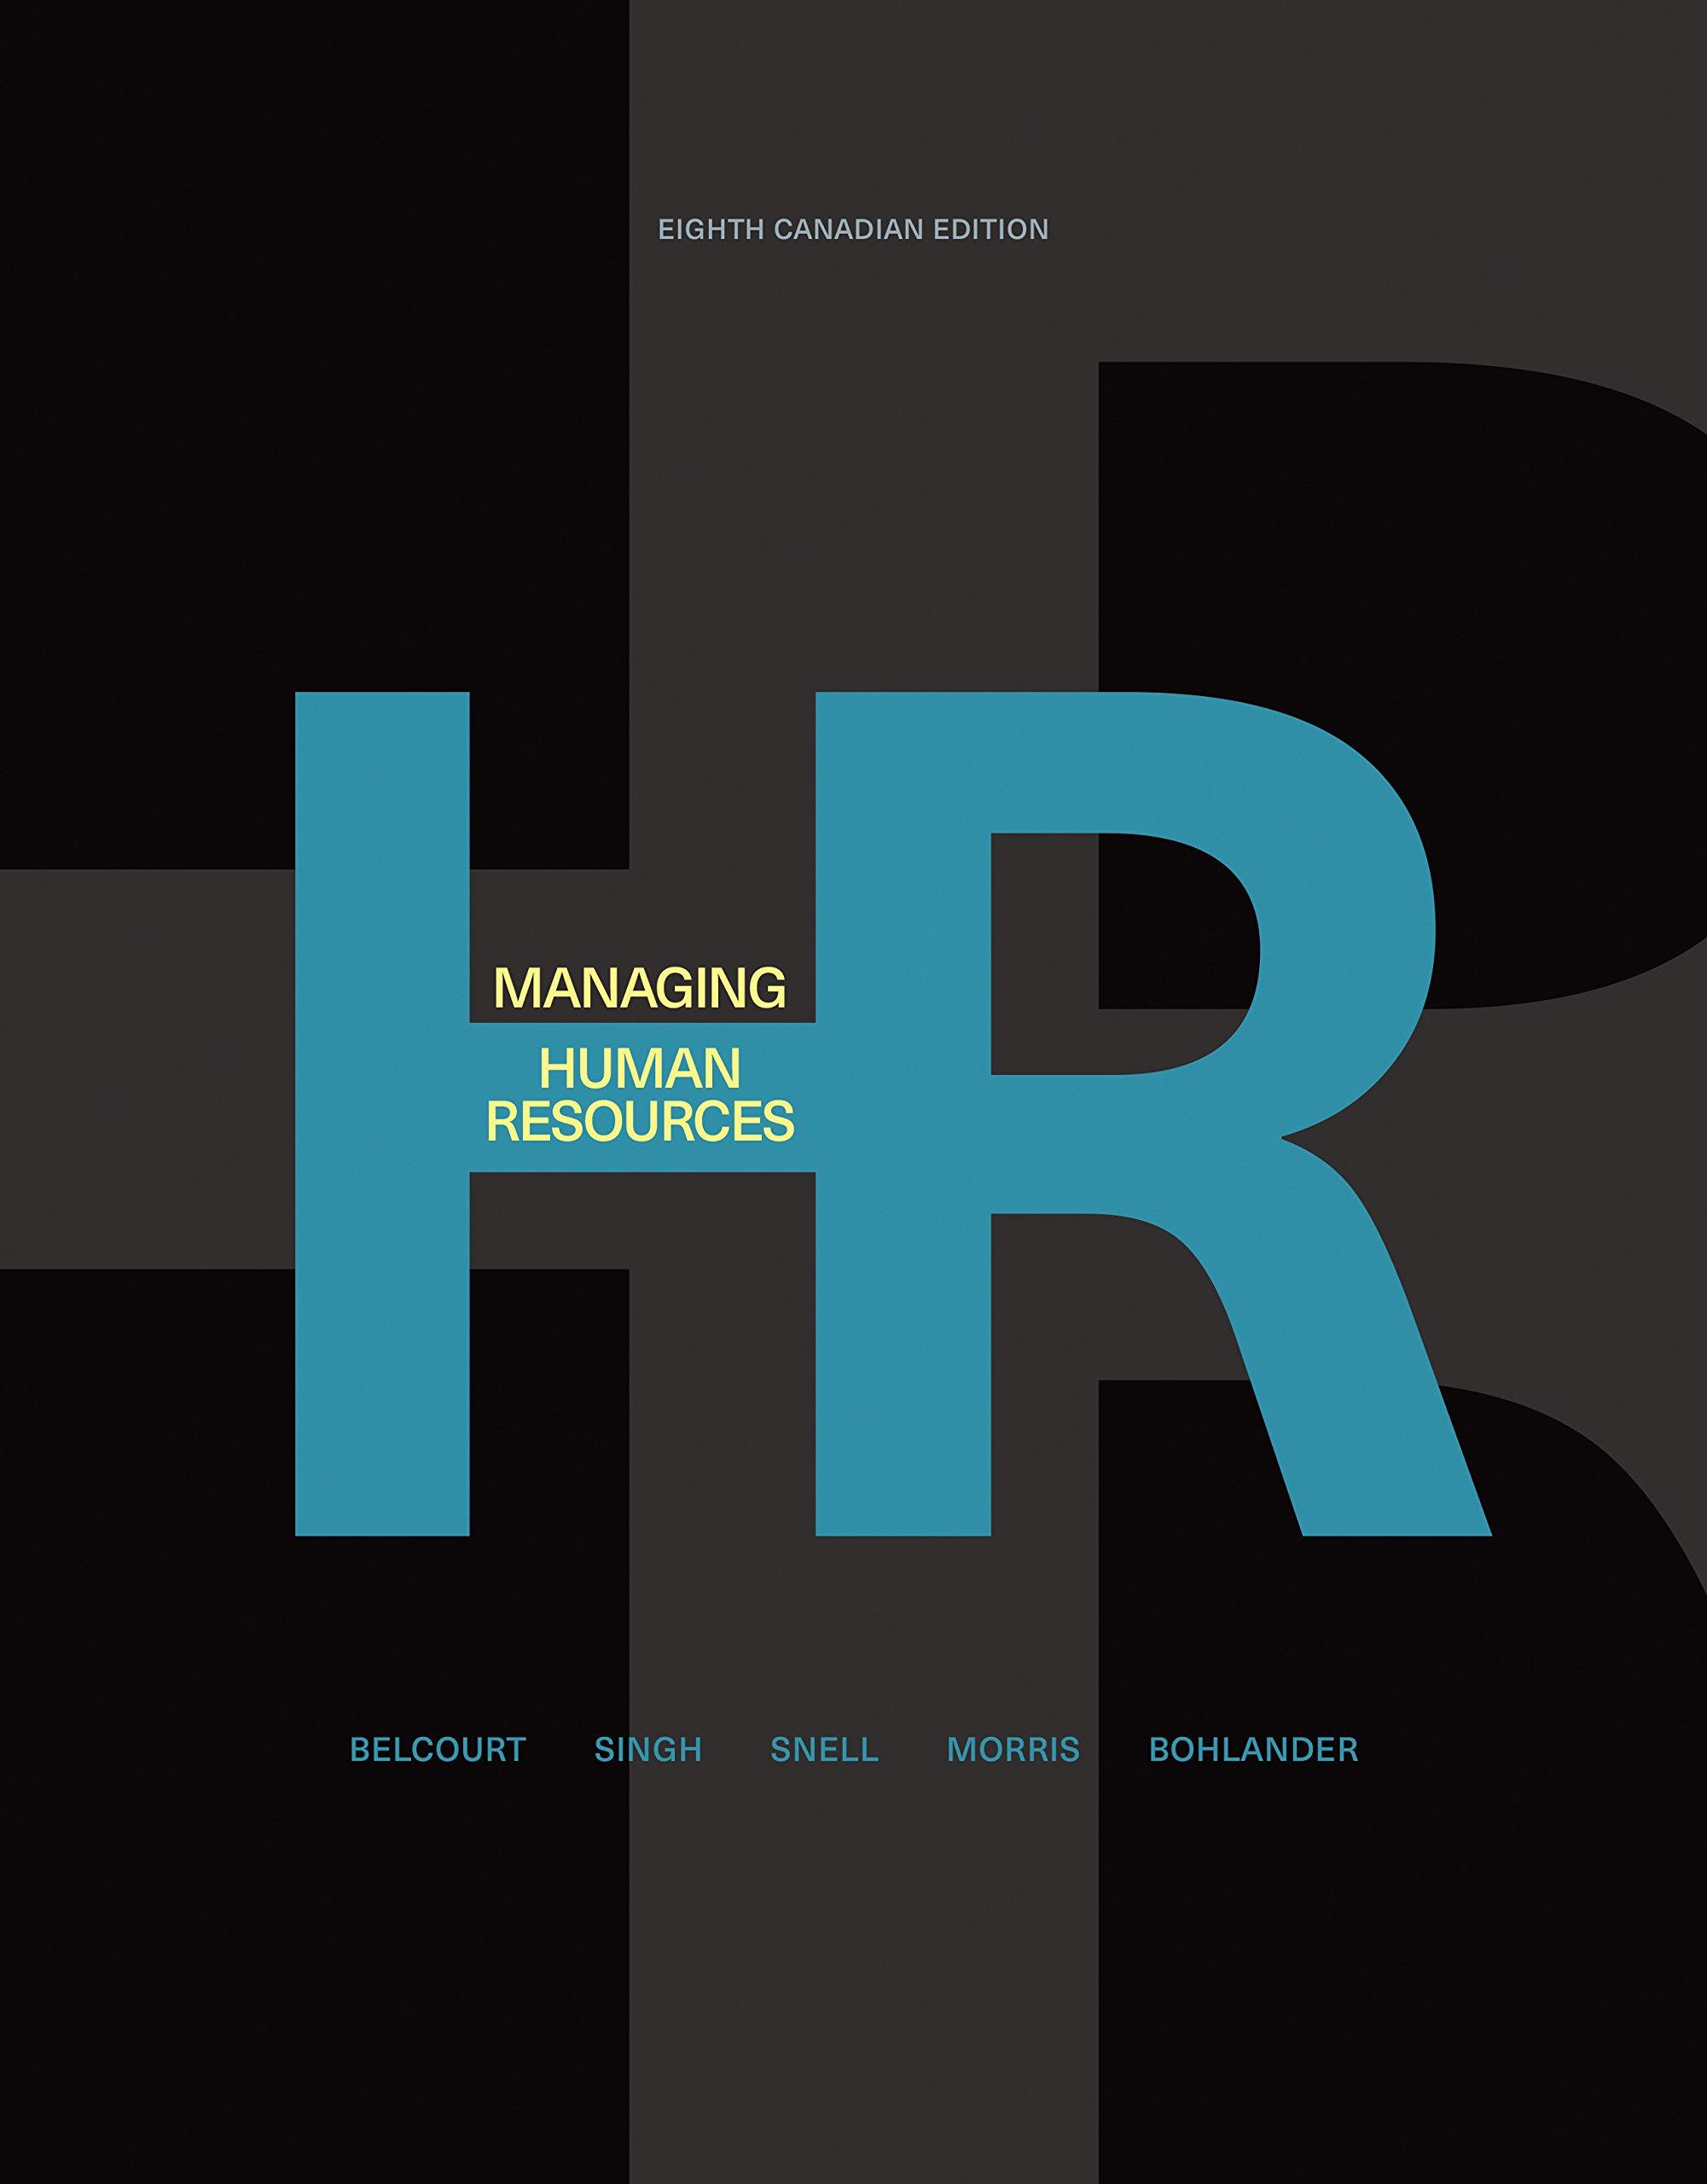 managing human resources 8th canadian edition shad morris monica belcourt, george w bohlander, scott snell,